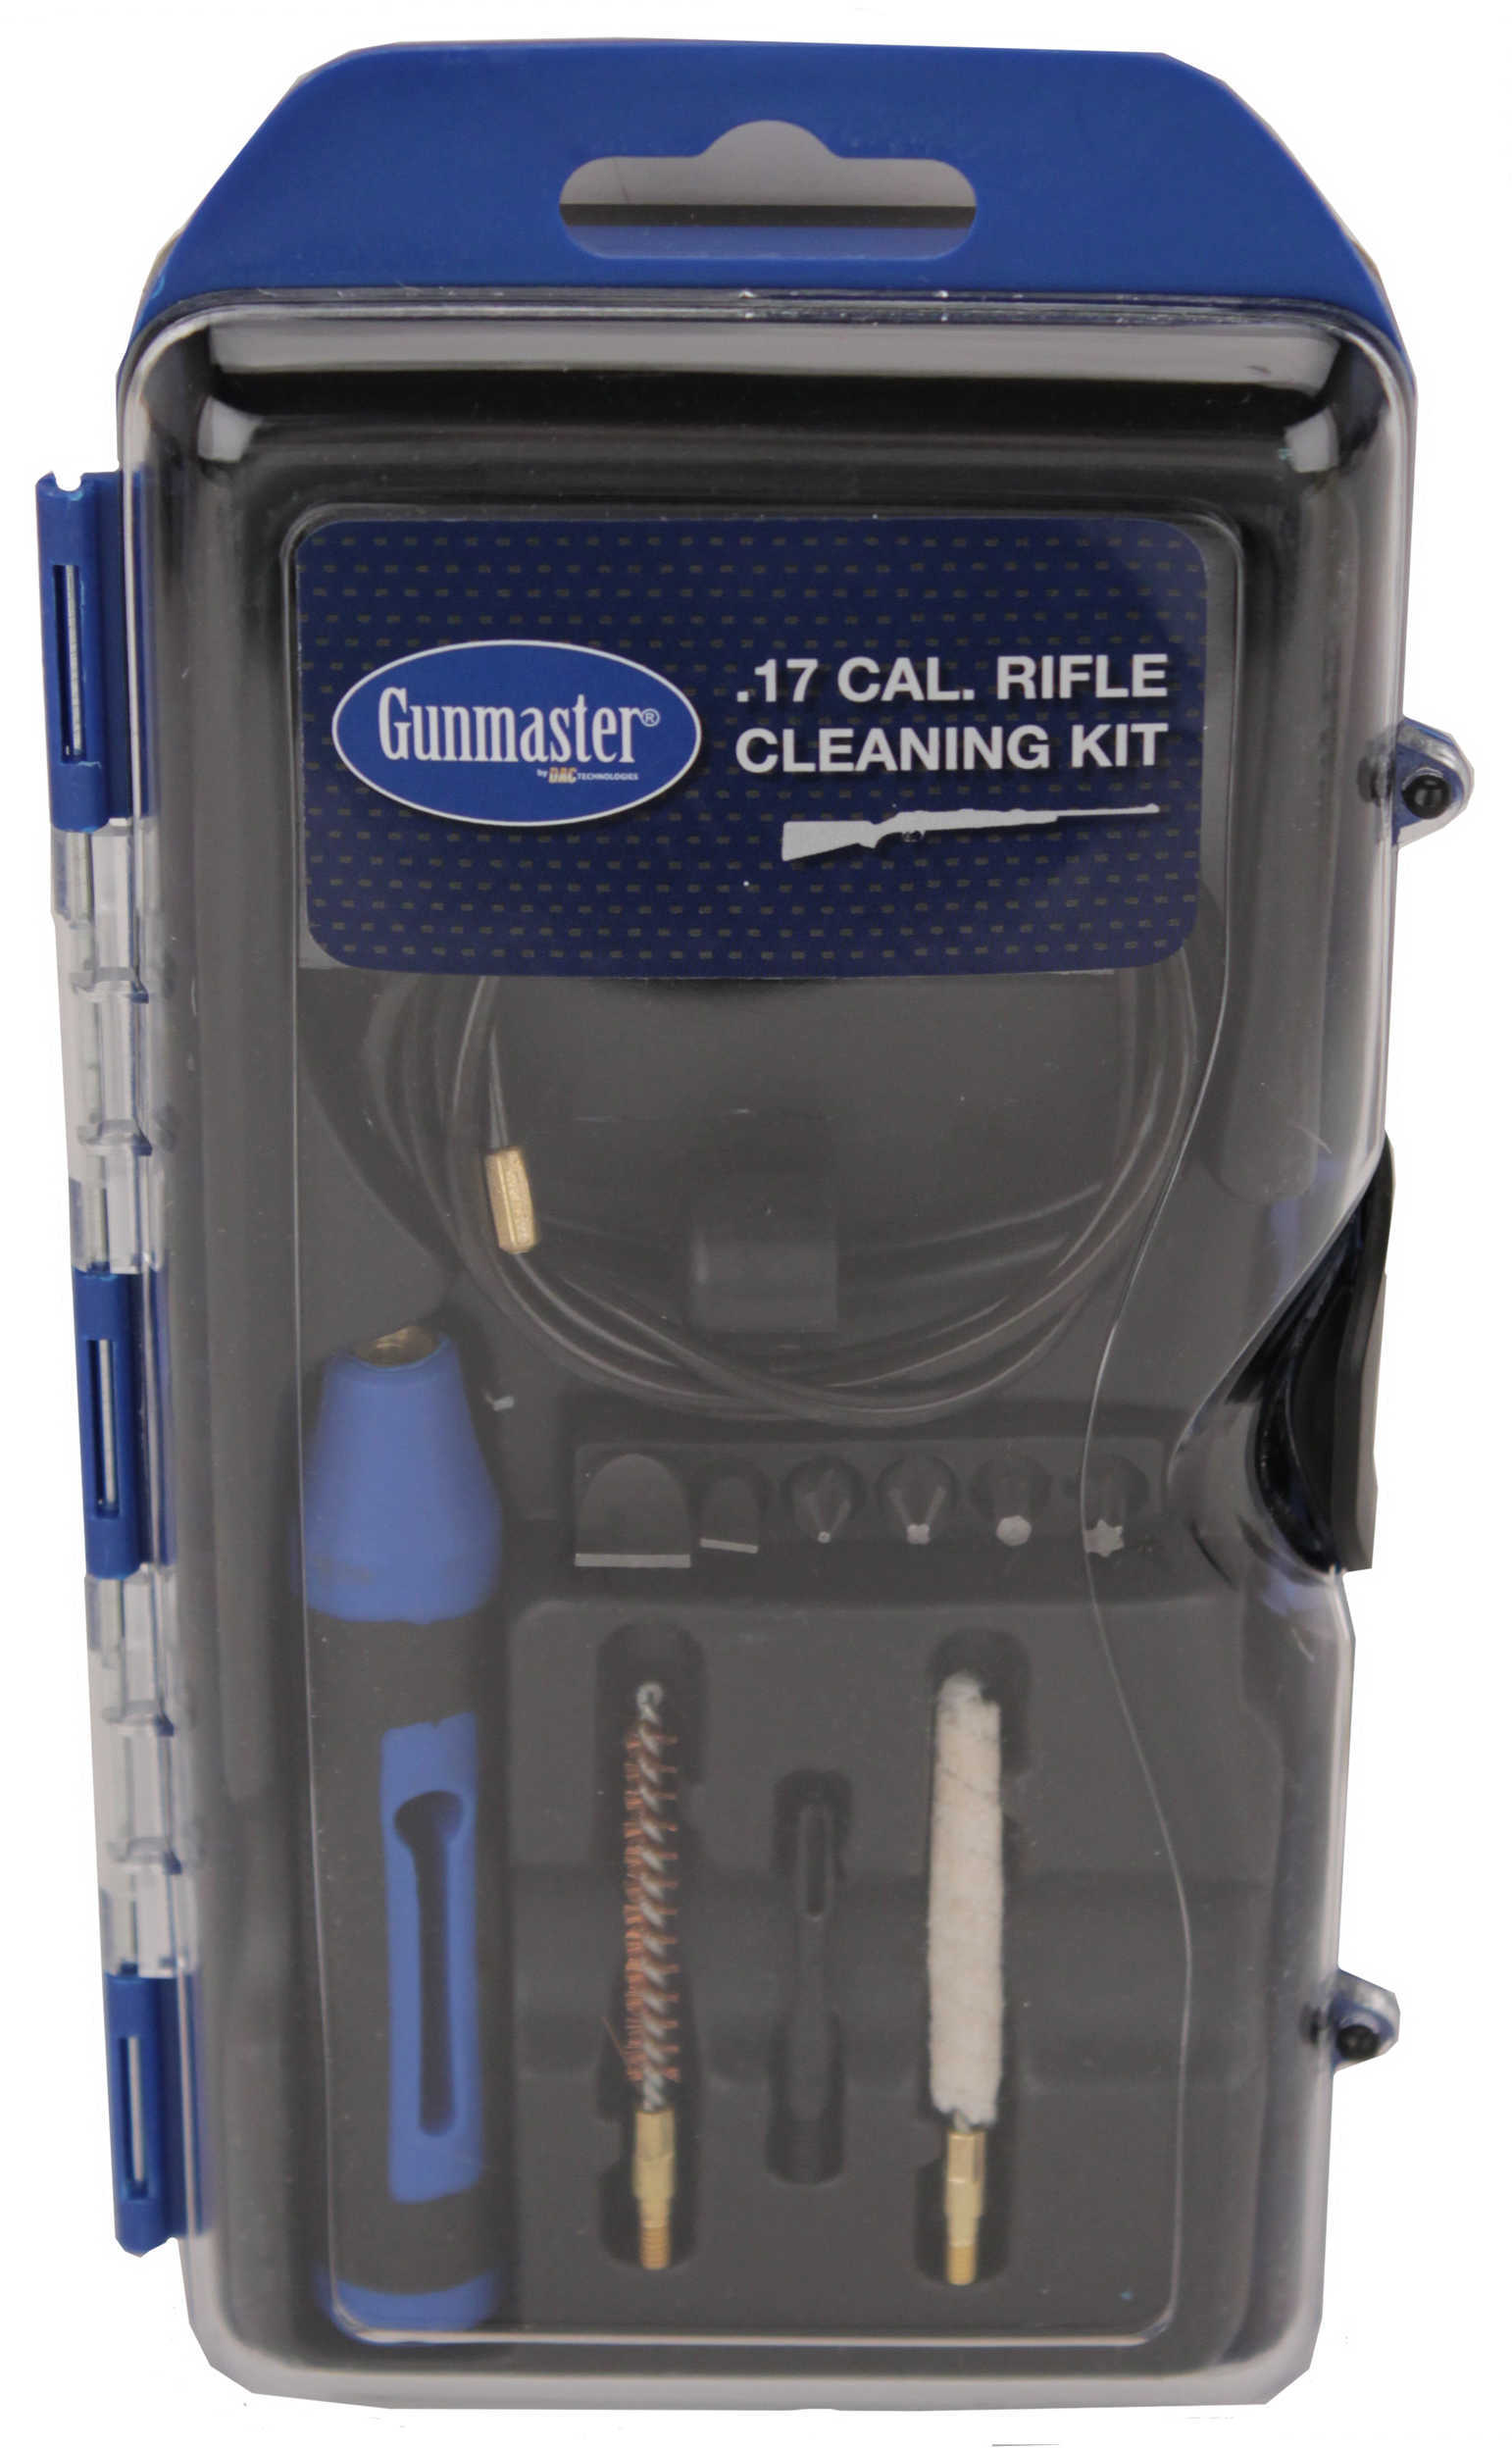 DAC GM17LR .17 Rifle Cleaning Kit Clamshell 14 Piece